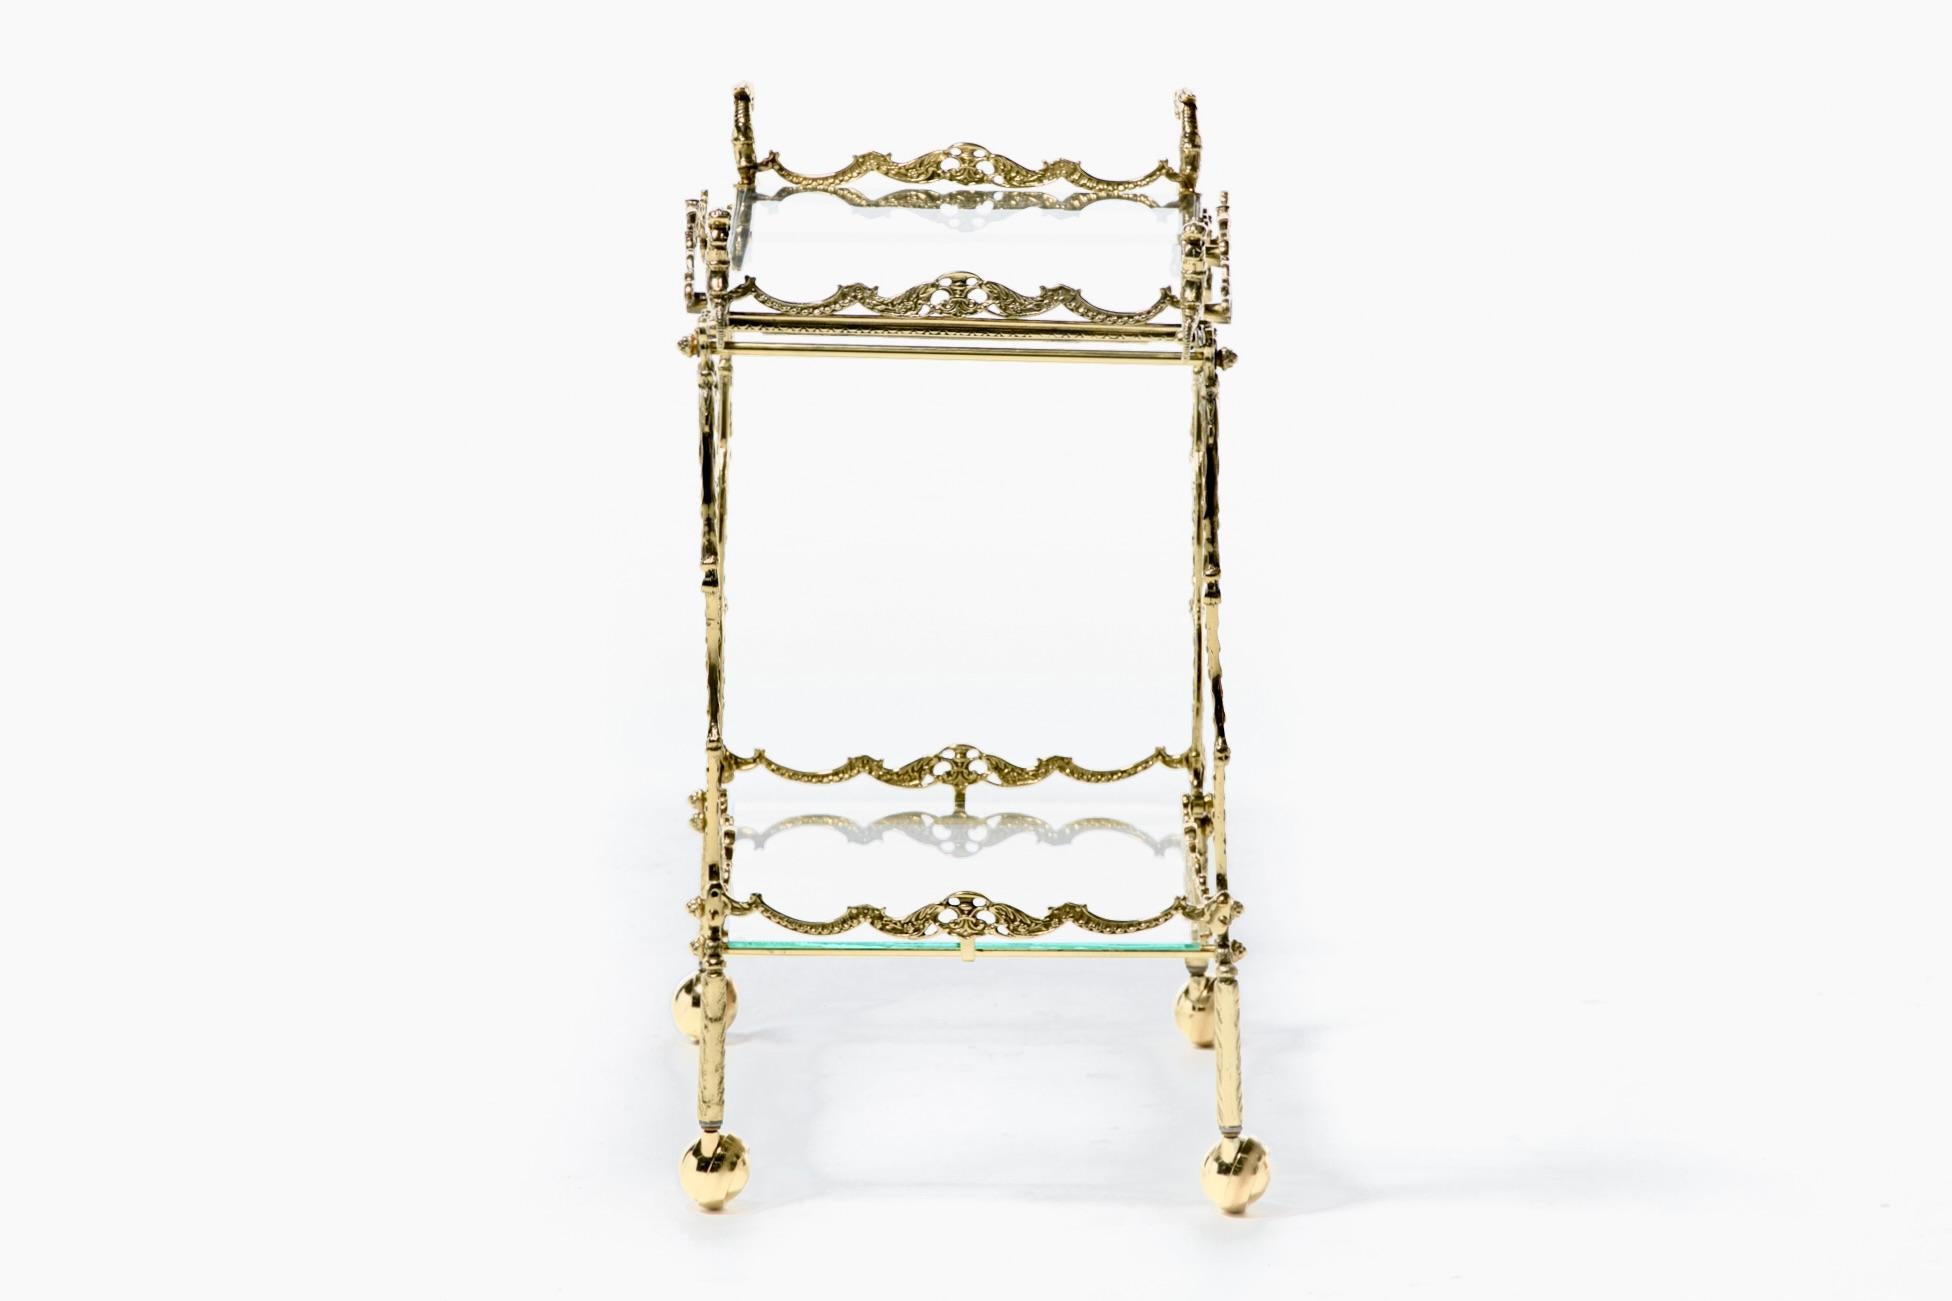 Hollywood Regency Ornate Chinoiserie Polished Brass Bar Cart c. 1955 For Sale 3